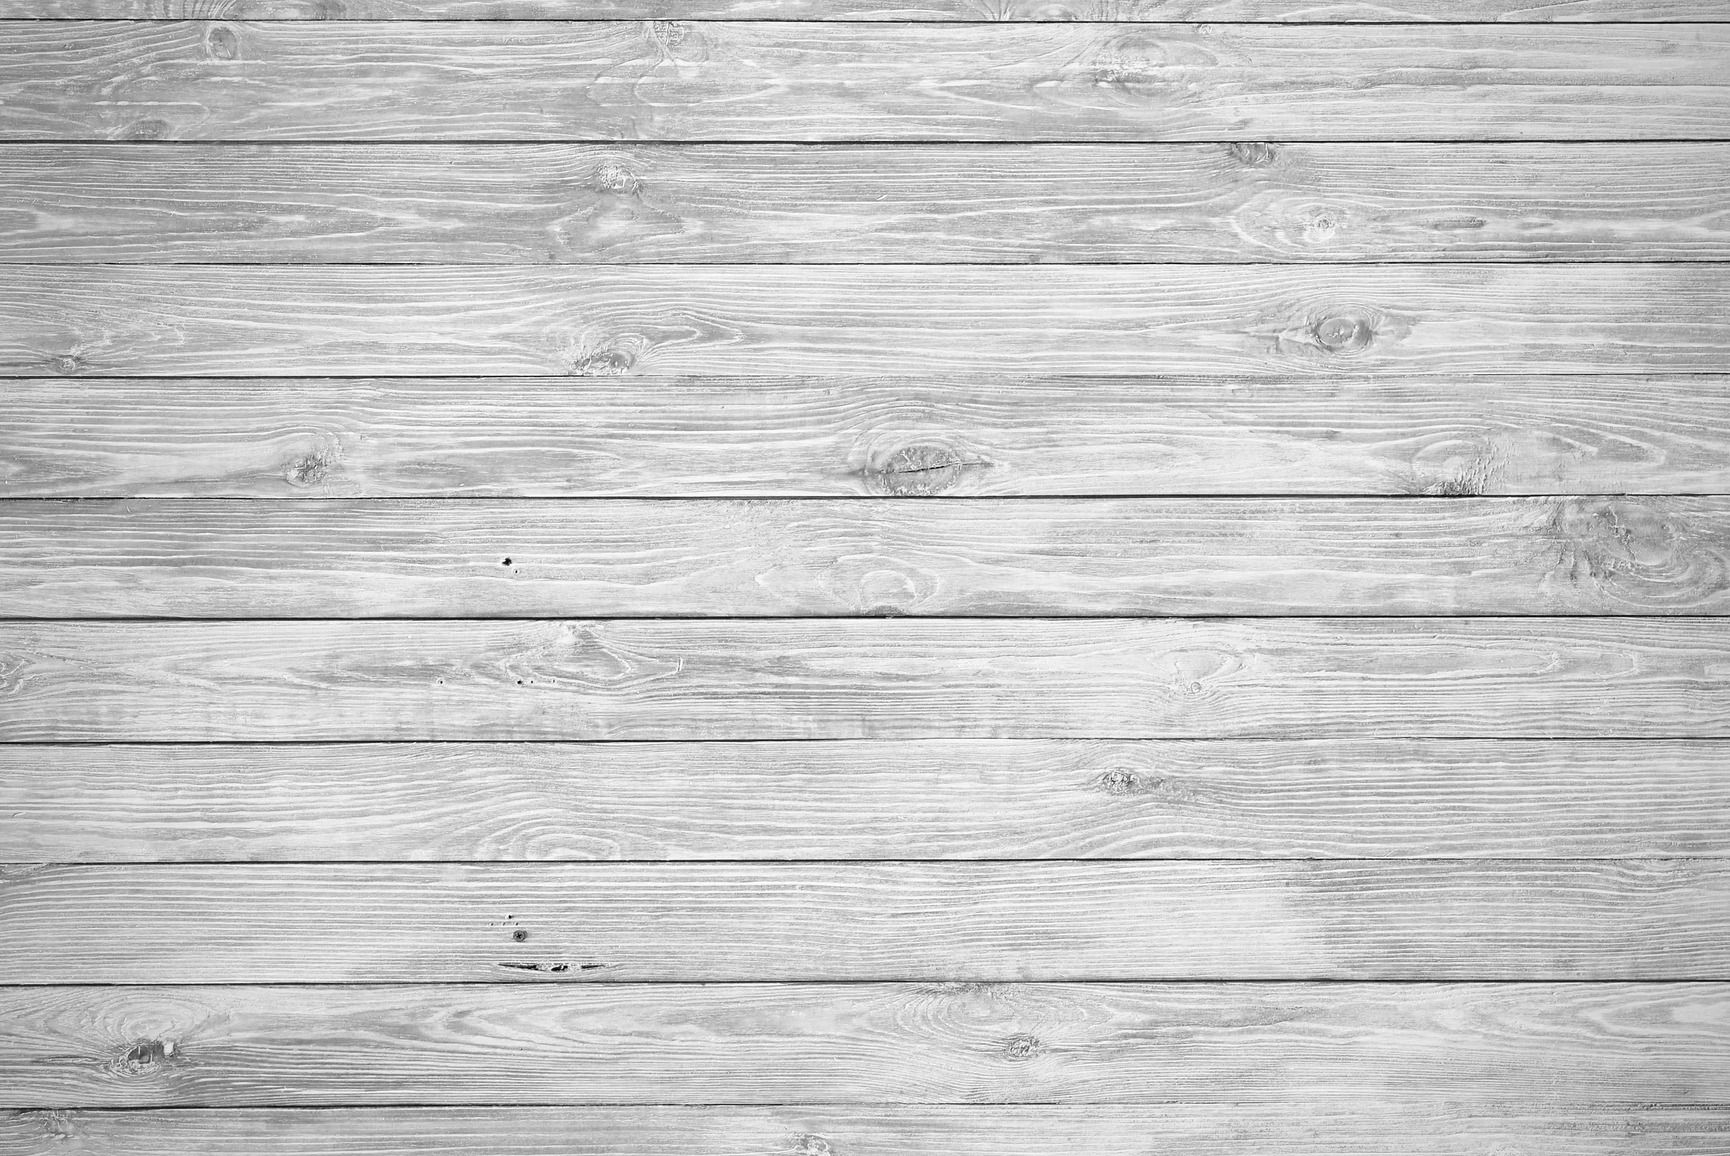 Inspire, motivate. Grey wood texture, Wood background, Wood wallpaper